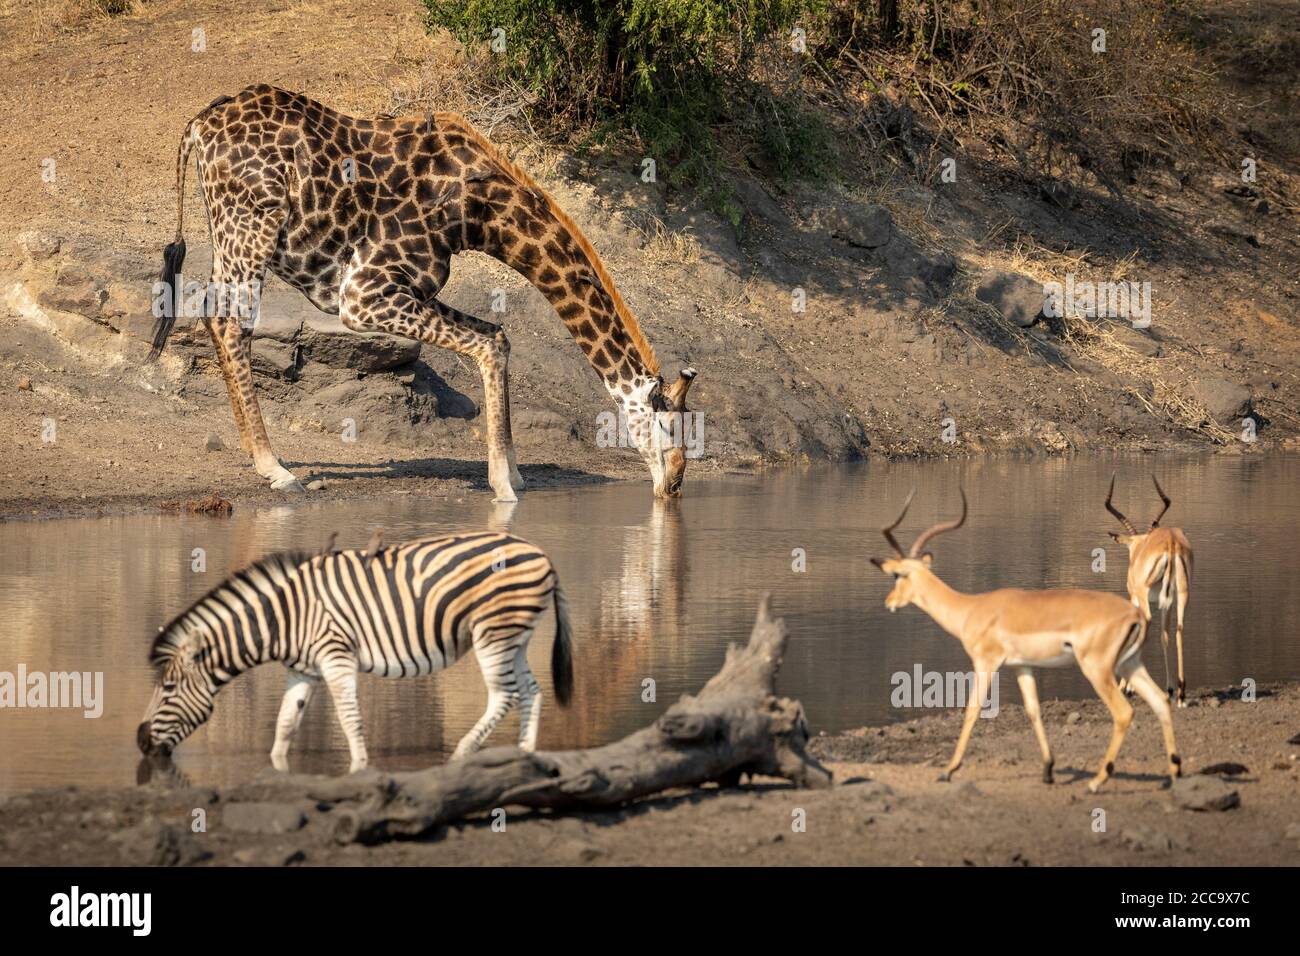 Adult giraffe, zebra and two impala standing at the river's edge drinking water in afternoon sunlight in Kruger South Africa Stock Photo